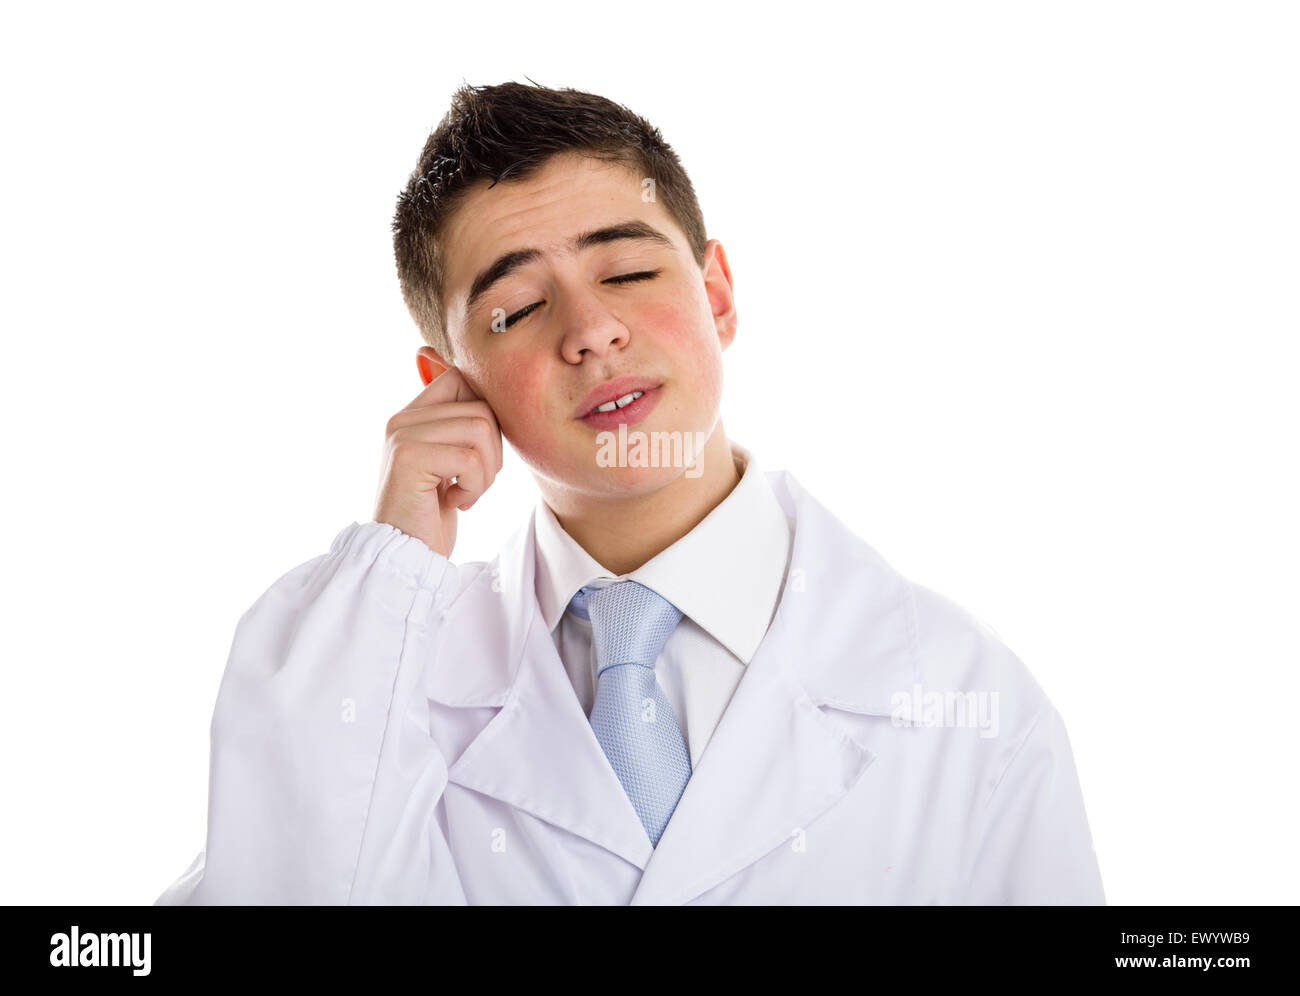 A boy doctor in white coat and blue tie helps to feel medicine more friendly: he is touching his ear with fingers. His acne skin has not ben retouched Stock Photo